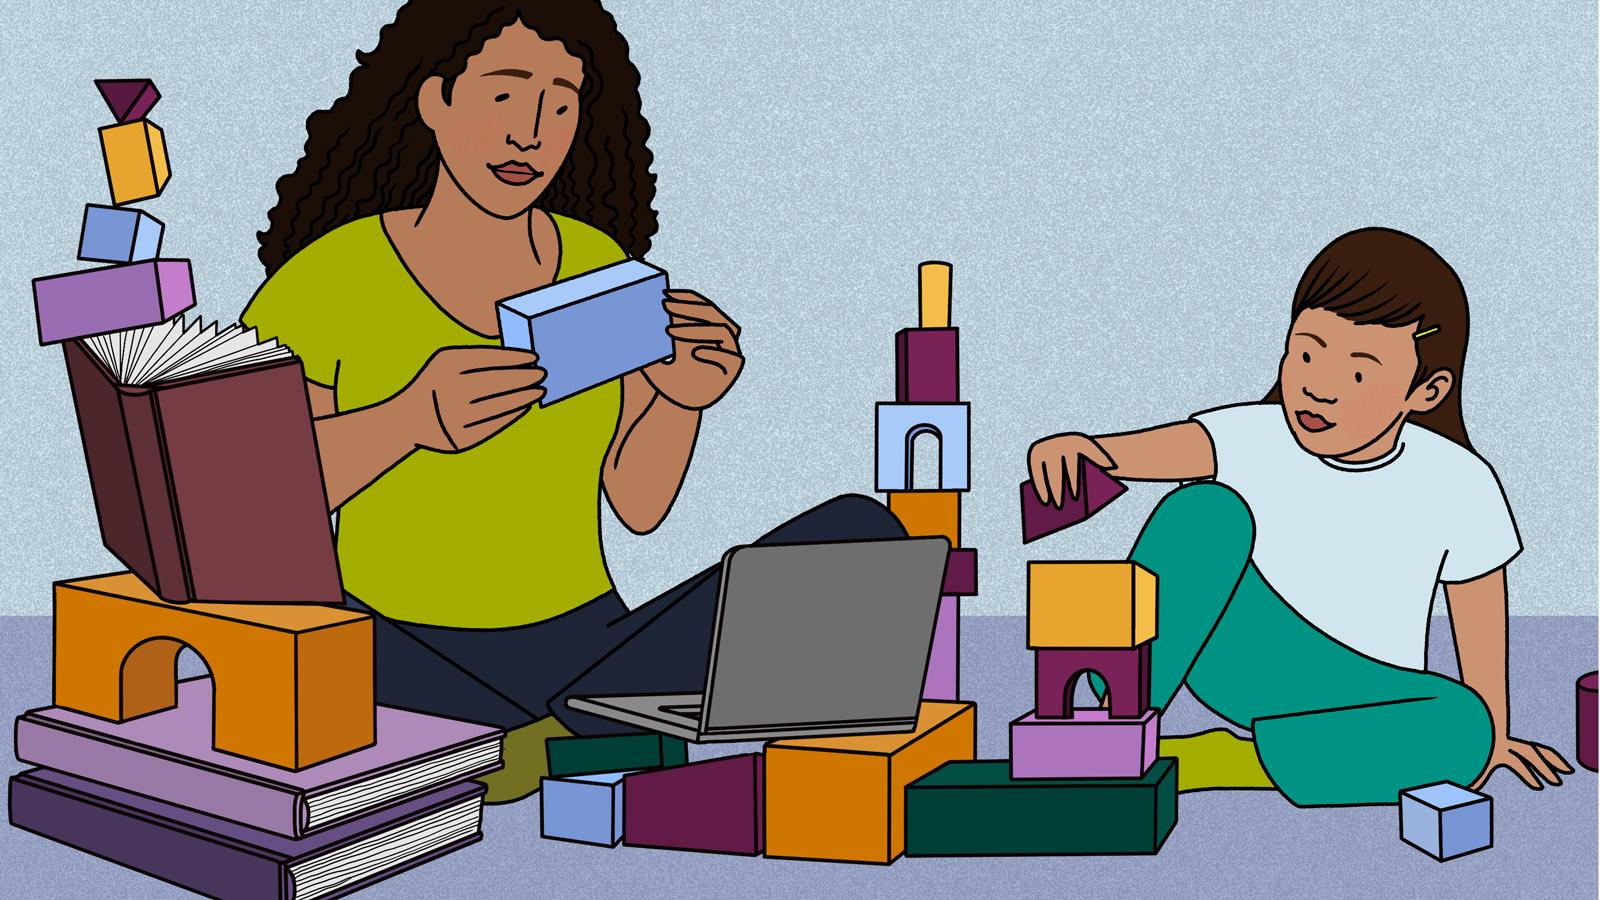 Illustration of a parent stacking blocks and books with their child while looking at a laptop